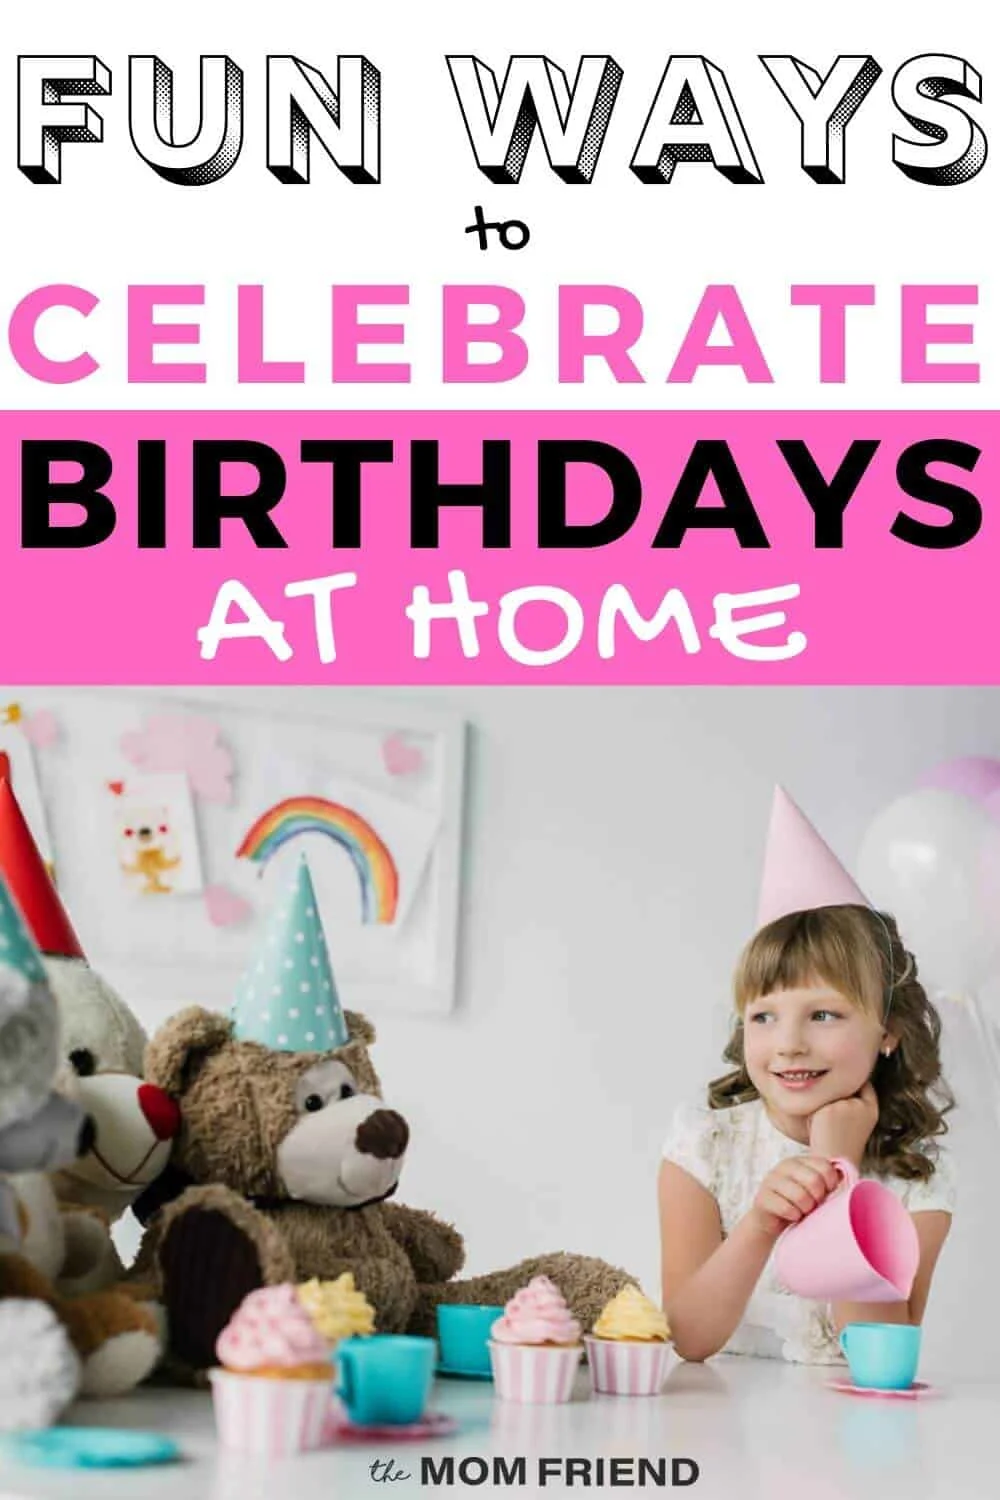 Pinnable image of social distancing birthday party for child at home.